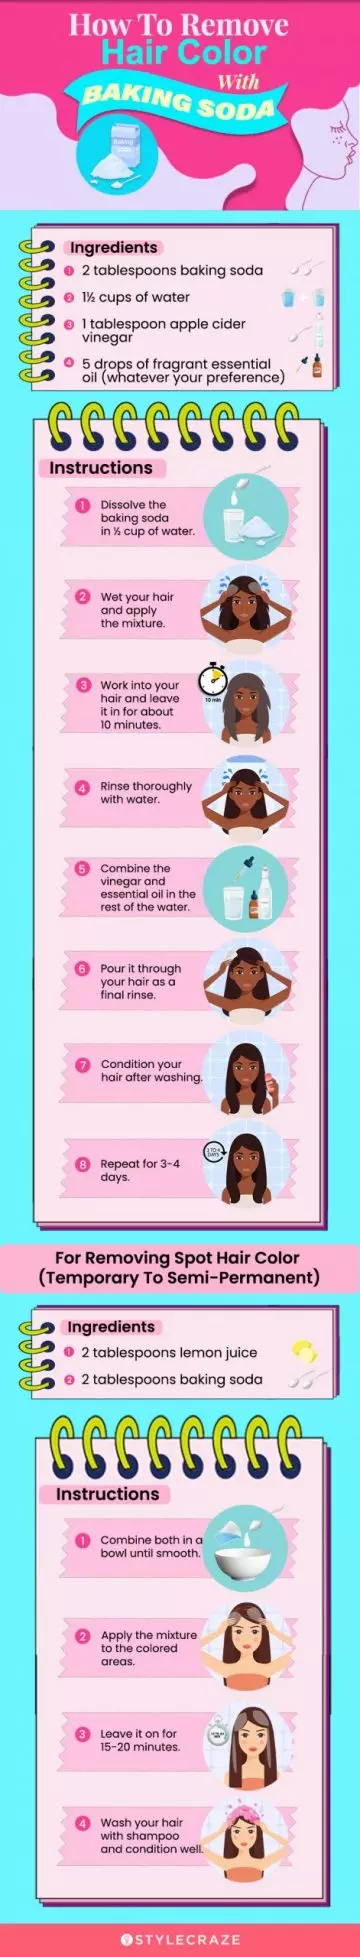 how to remove hair color with baking soda (infographic)